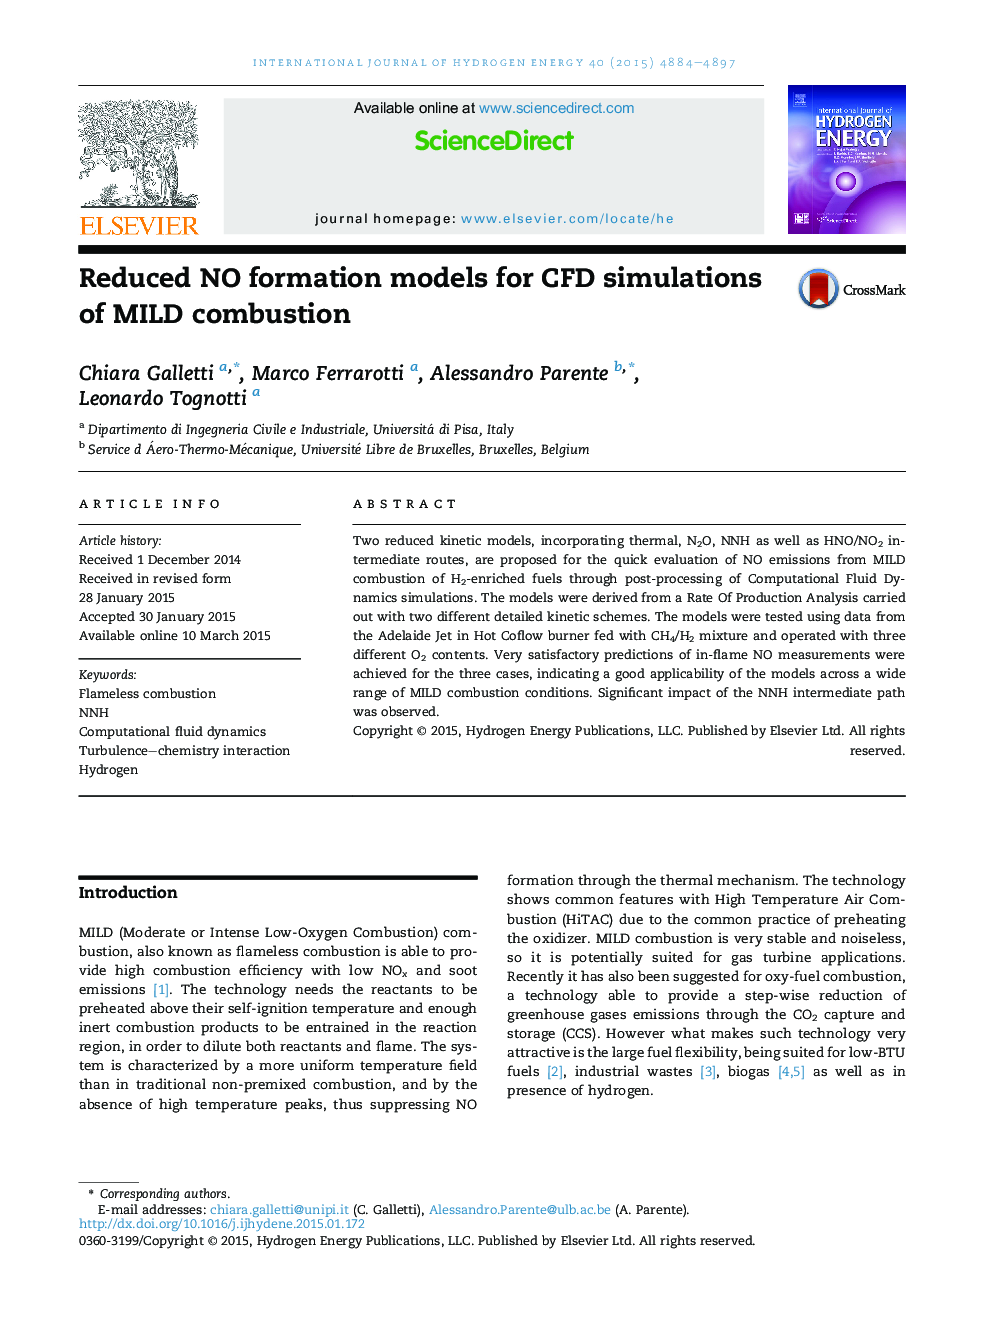 Reduced NO formation models for CFD simulations of MILD combustion